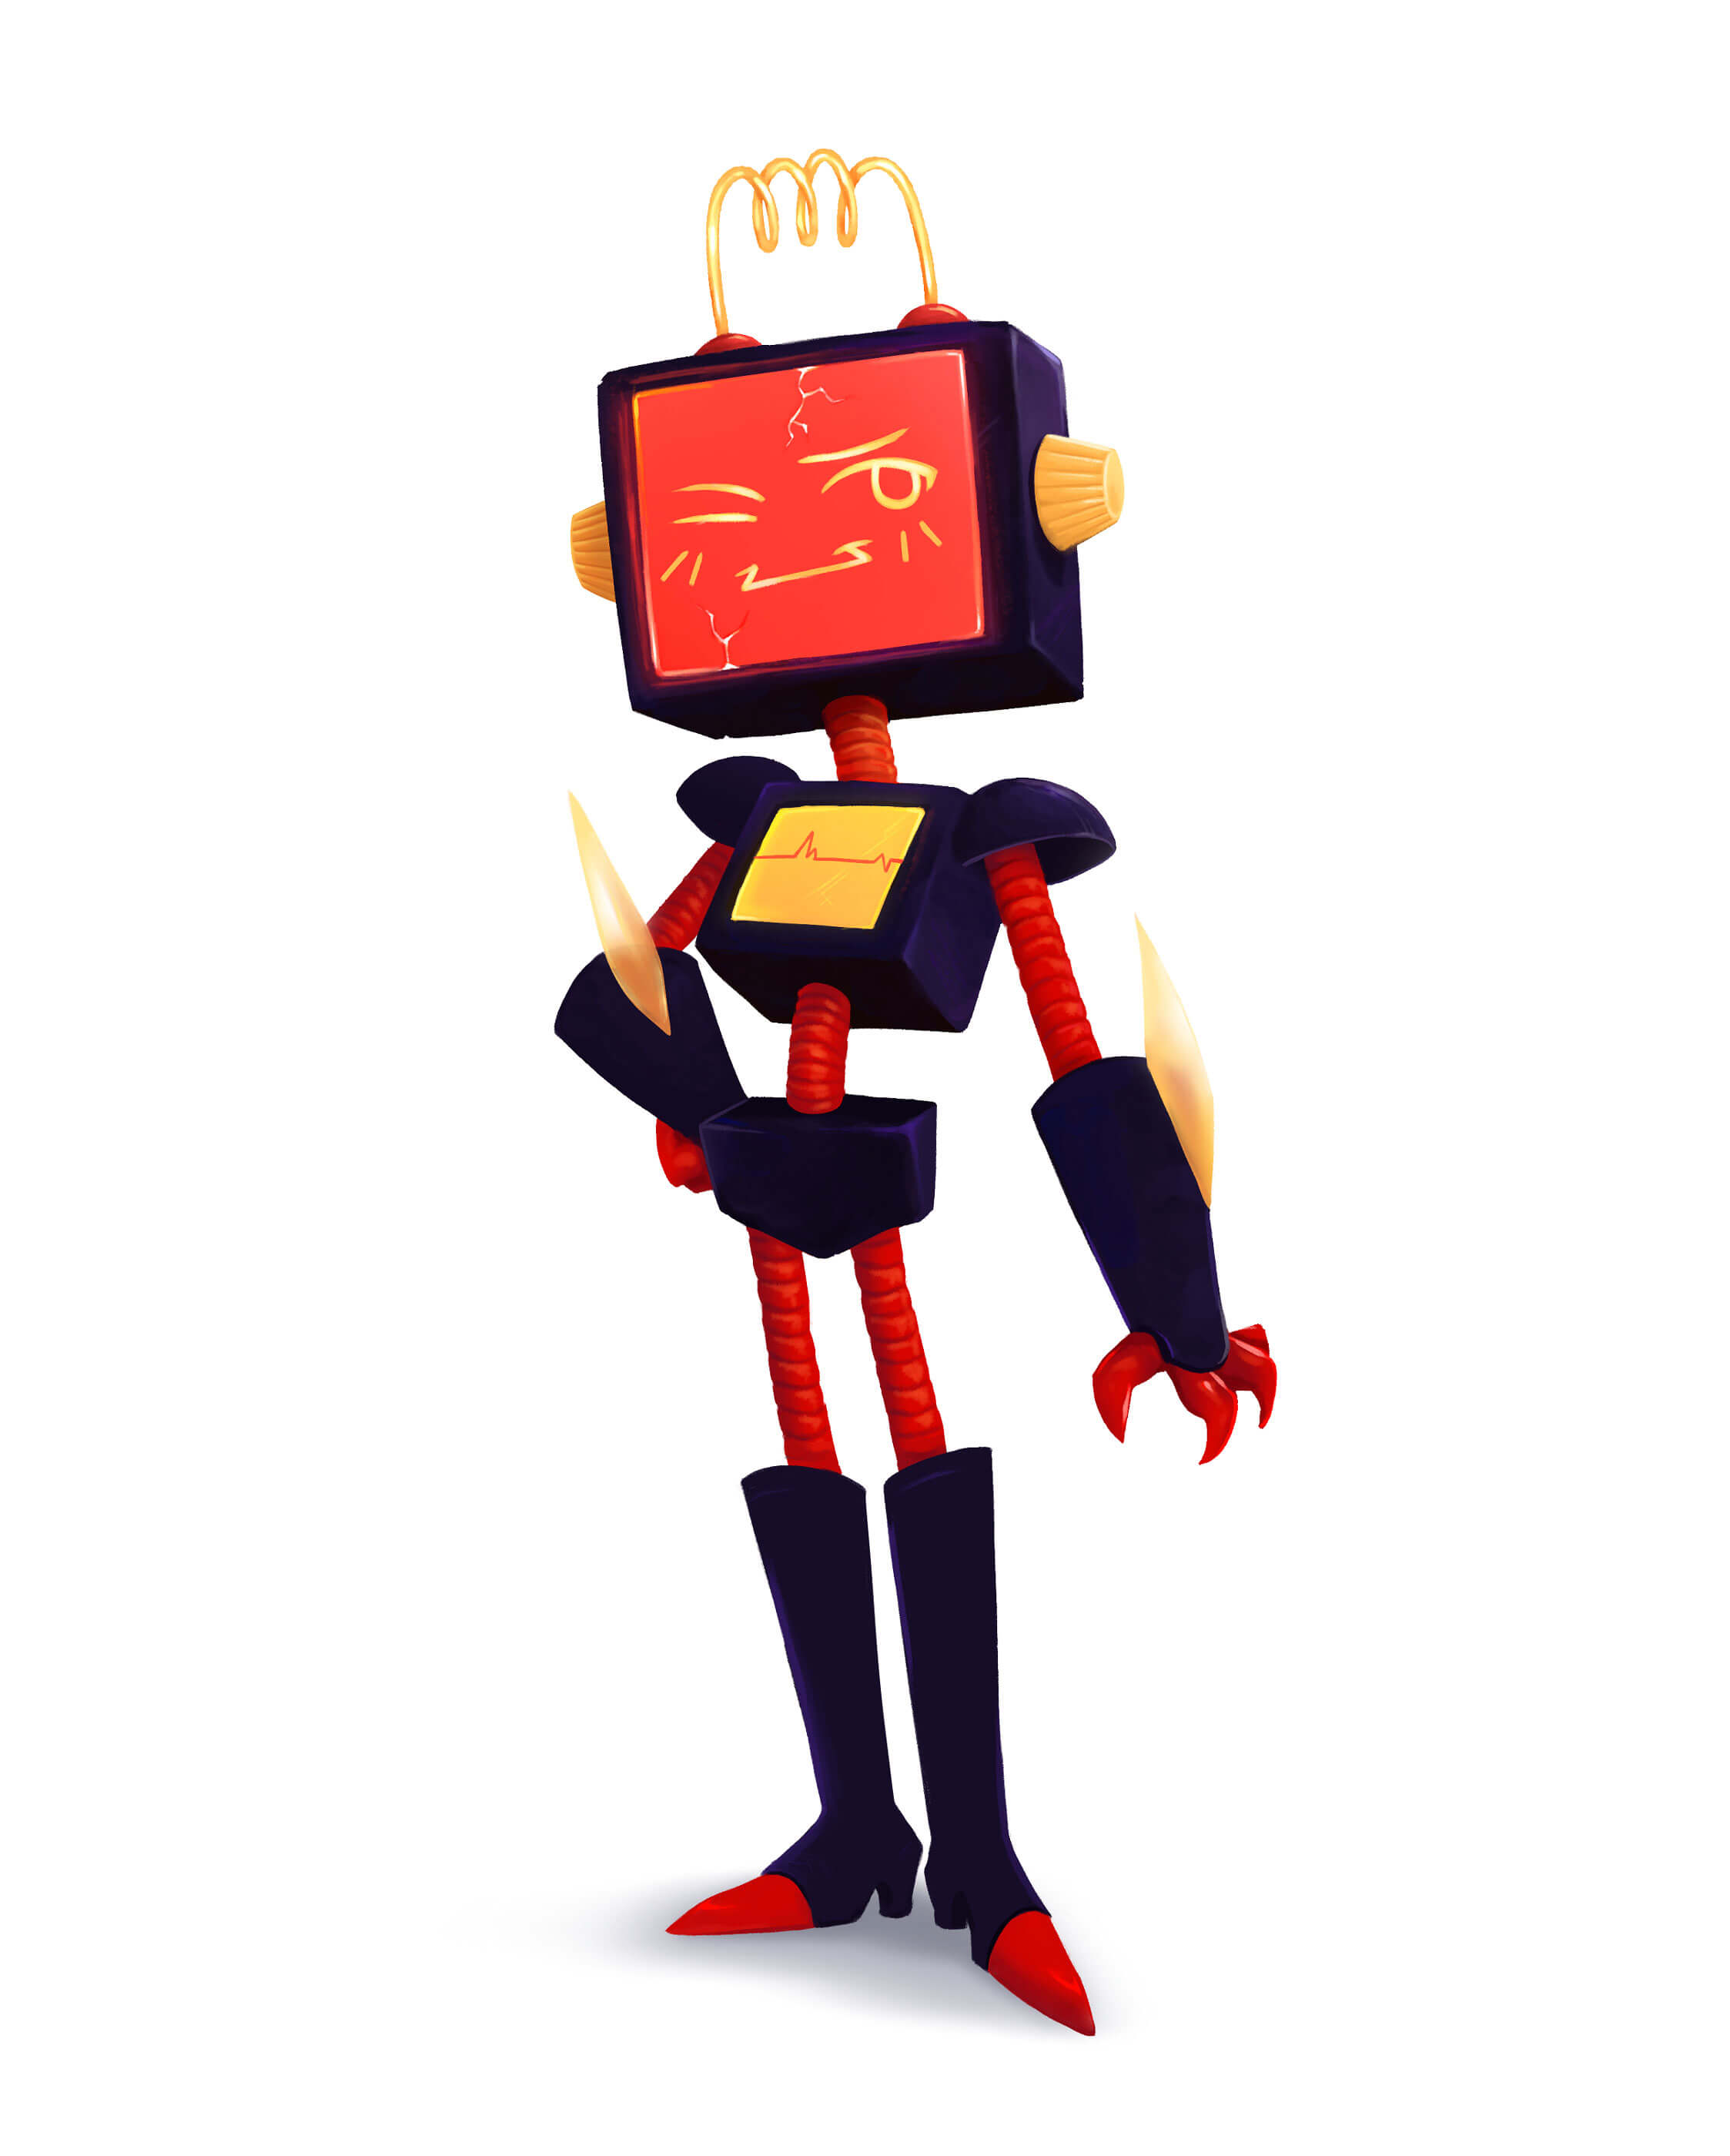 A red, robot character with a tv for a head winks.